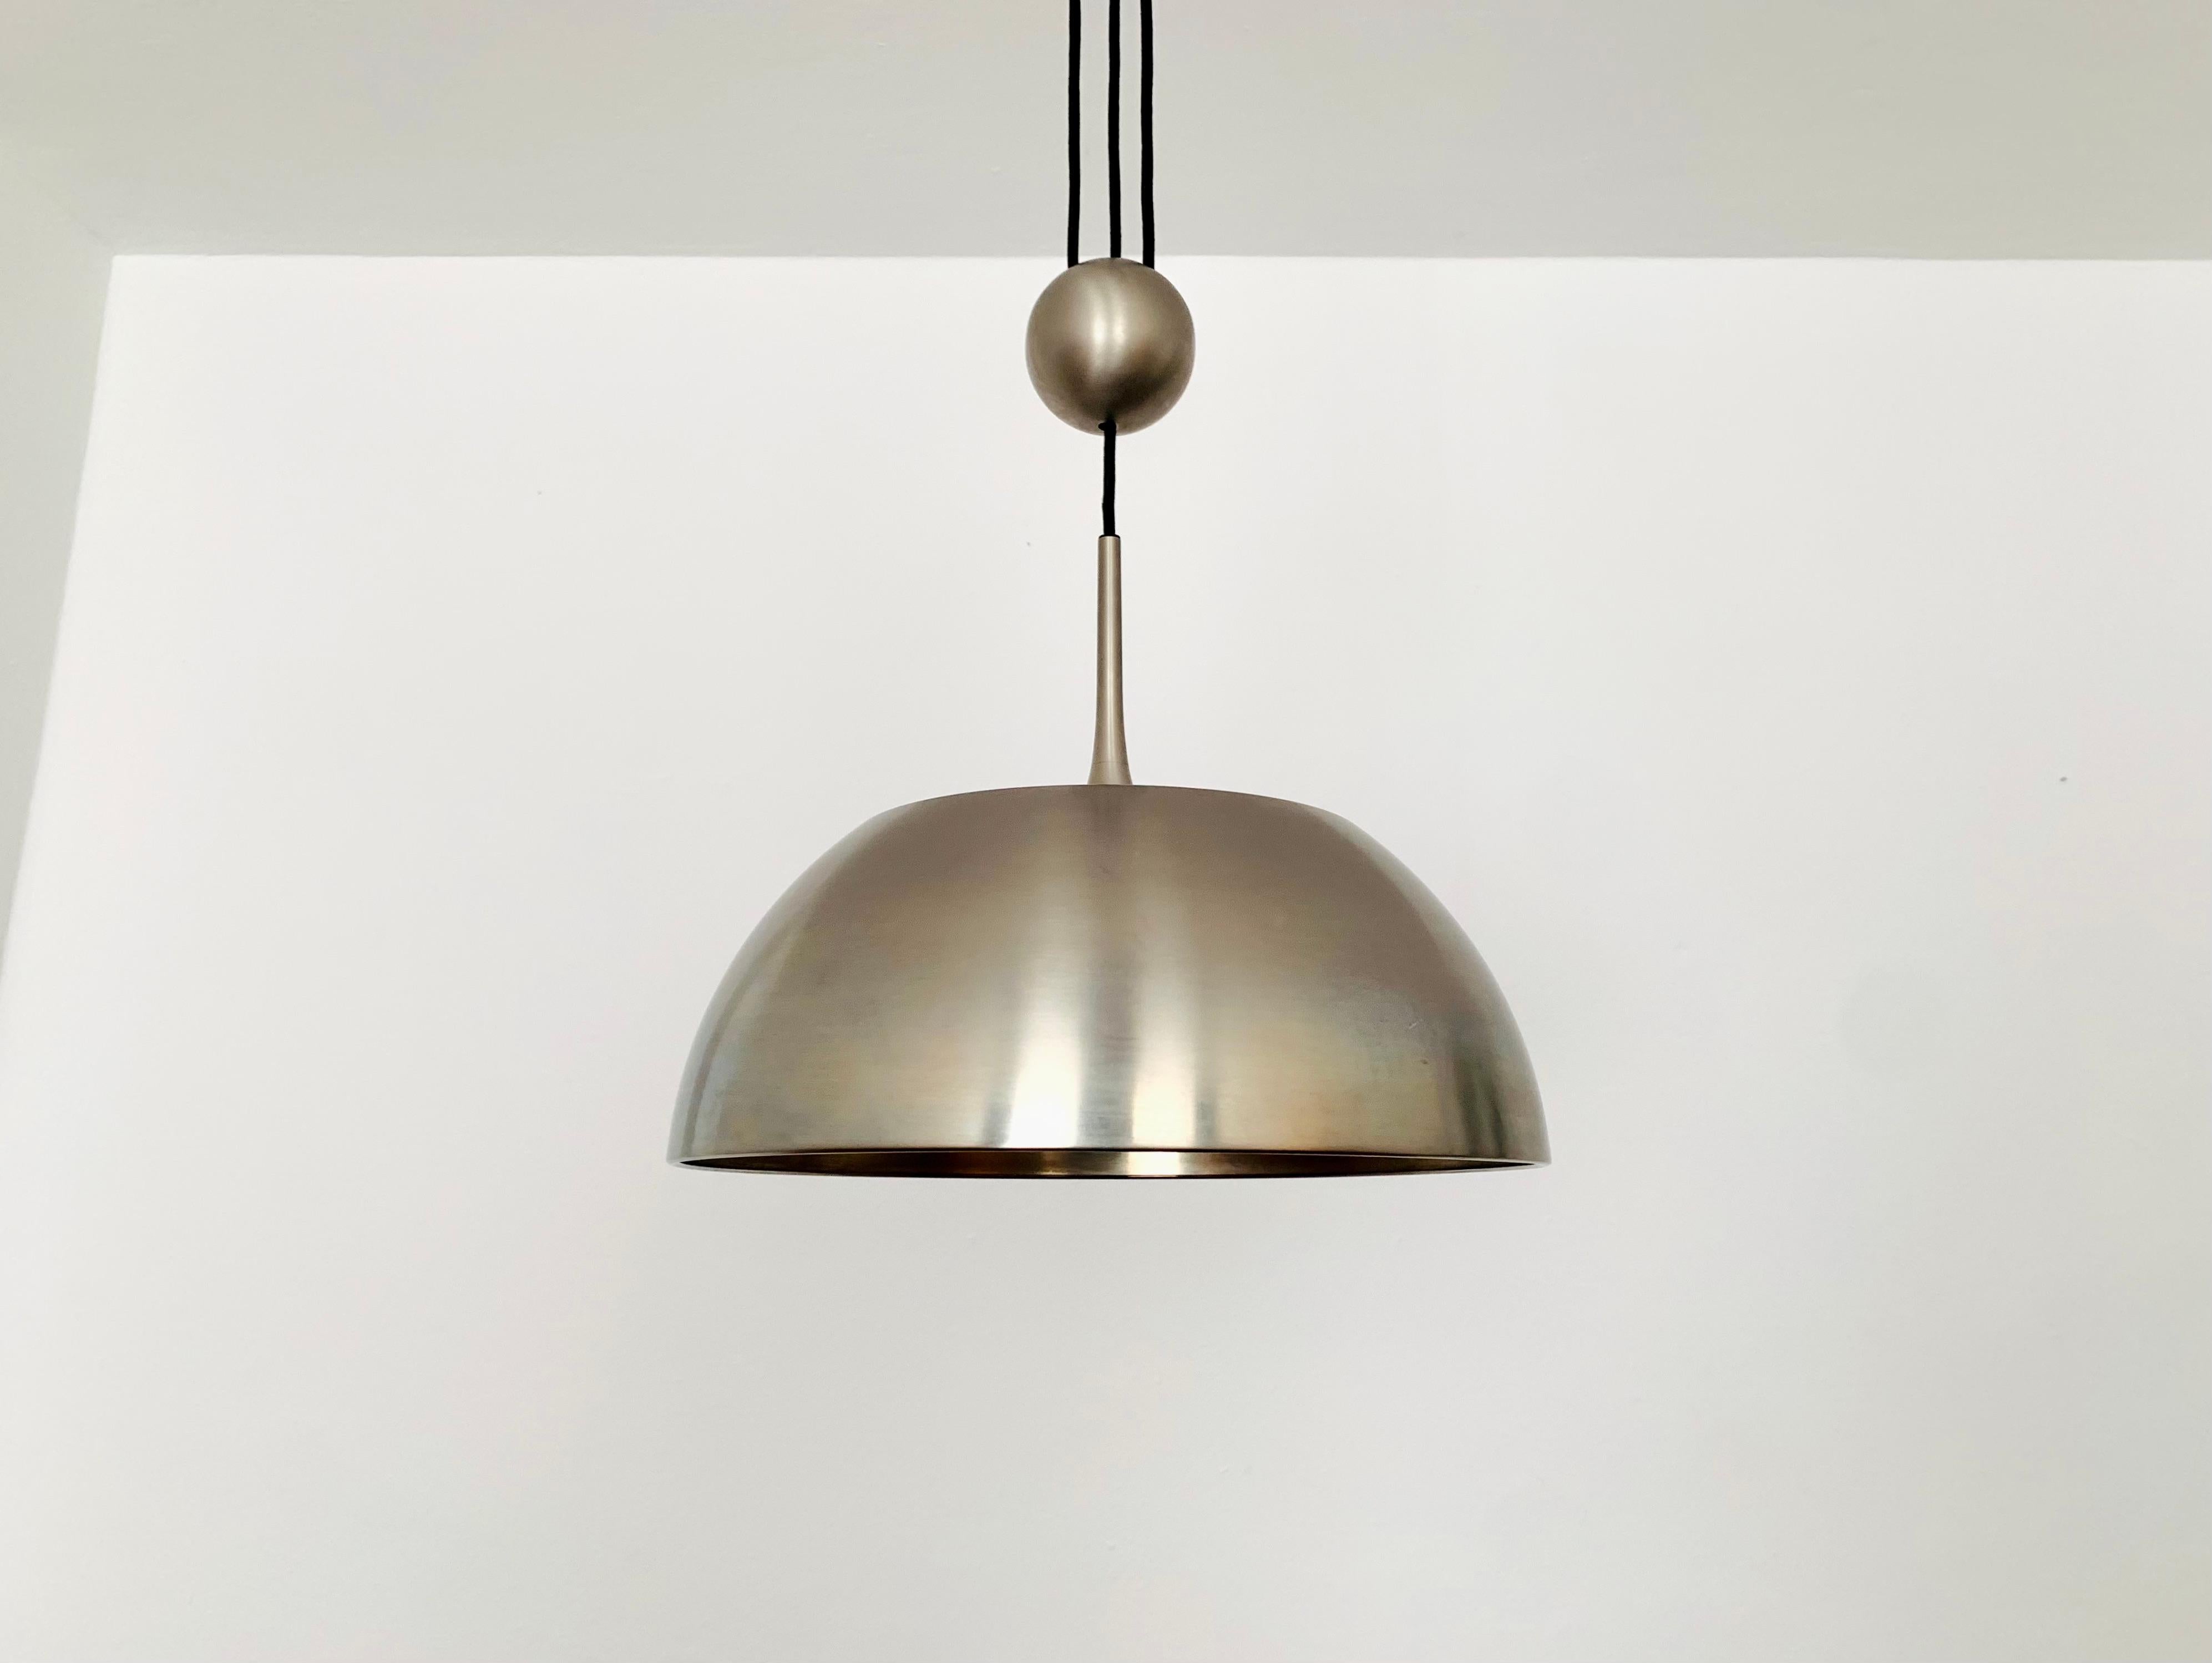 Very nice, height-adjustable pendant lamp from the 1970s.
The lighting effect of the lamp is extremely beautiful.
The design creates a very elegant and pleasant light.
The lamp creates a very cozy atmosphere and is of very high quality.

Design: